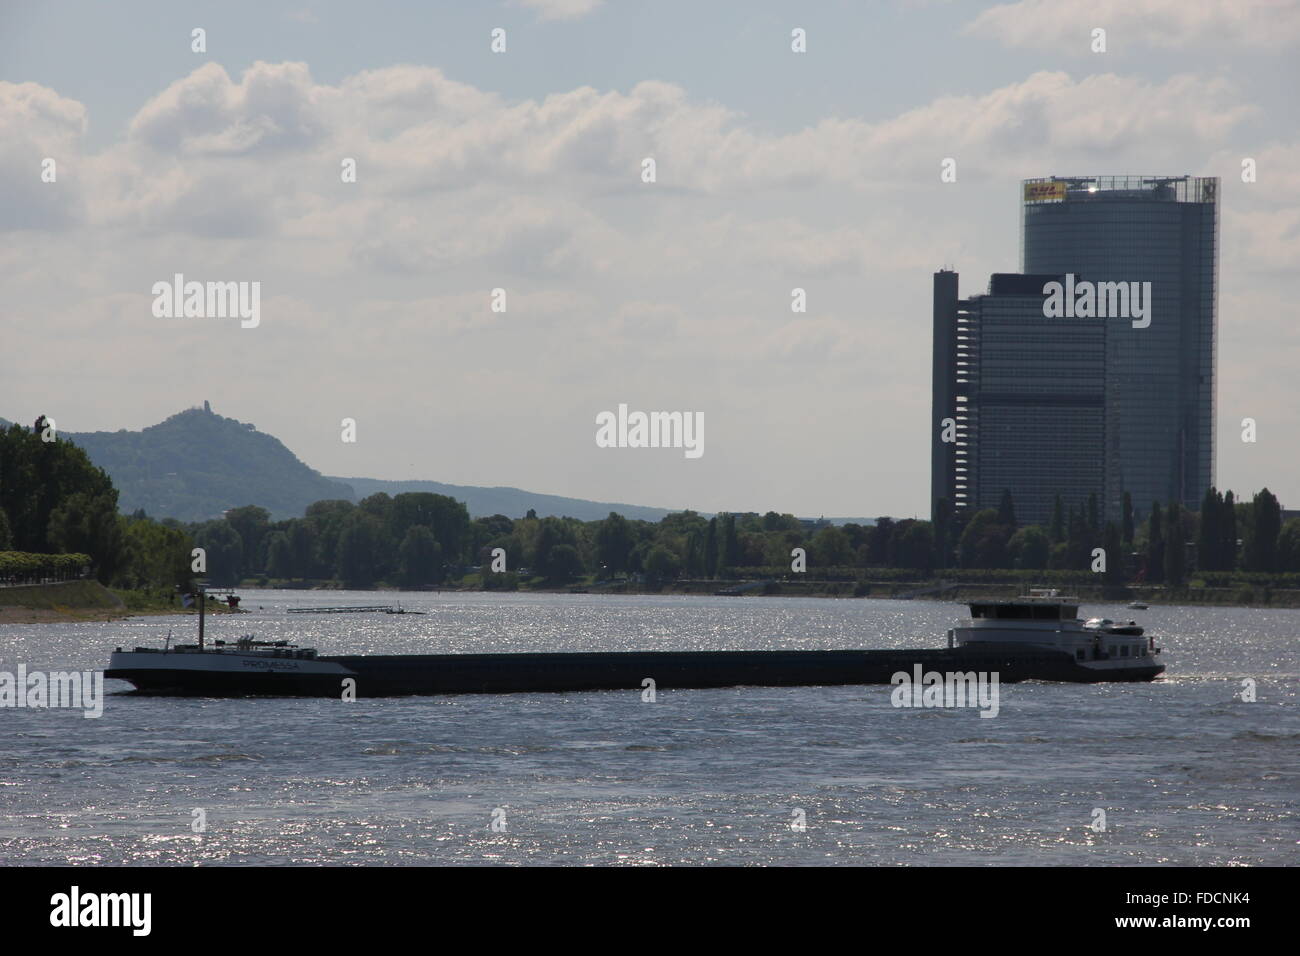 River Rhine landscape with Post Tower and UN Tower near Bonn, Germany Stock Photo